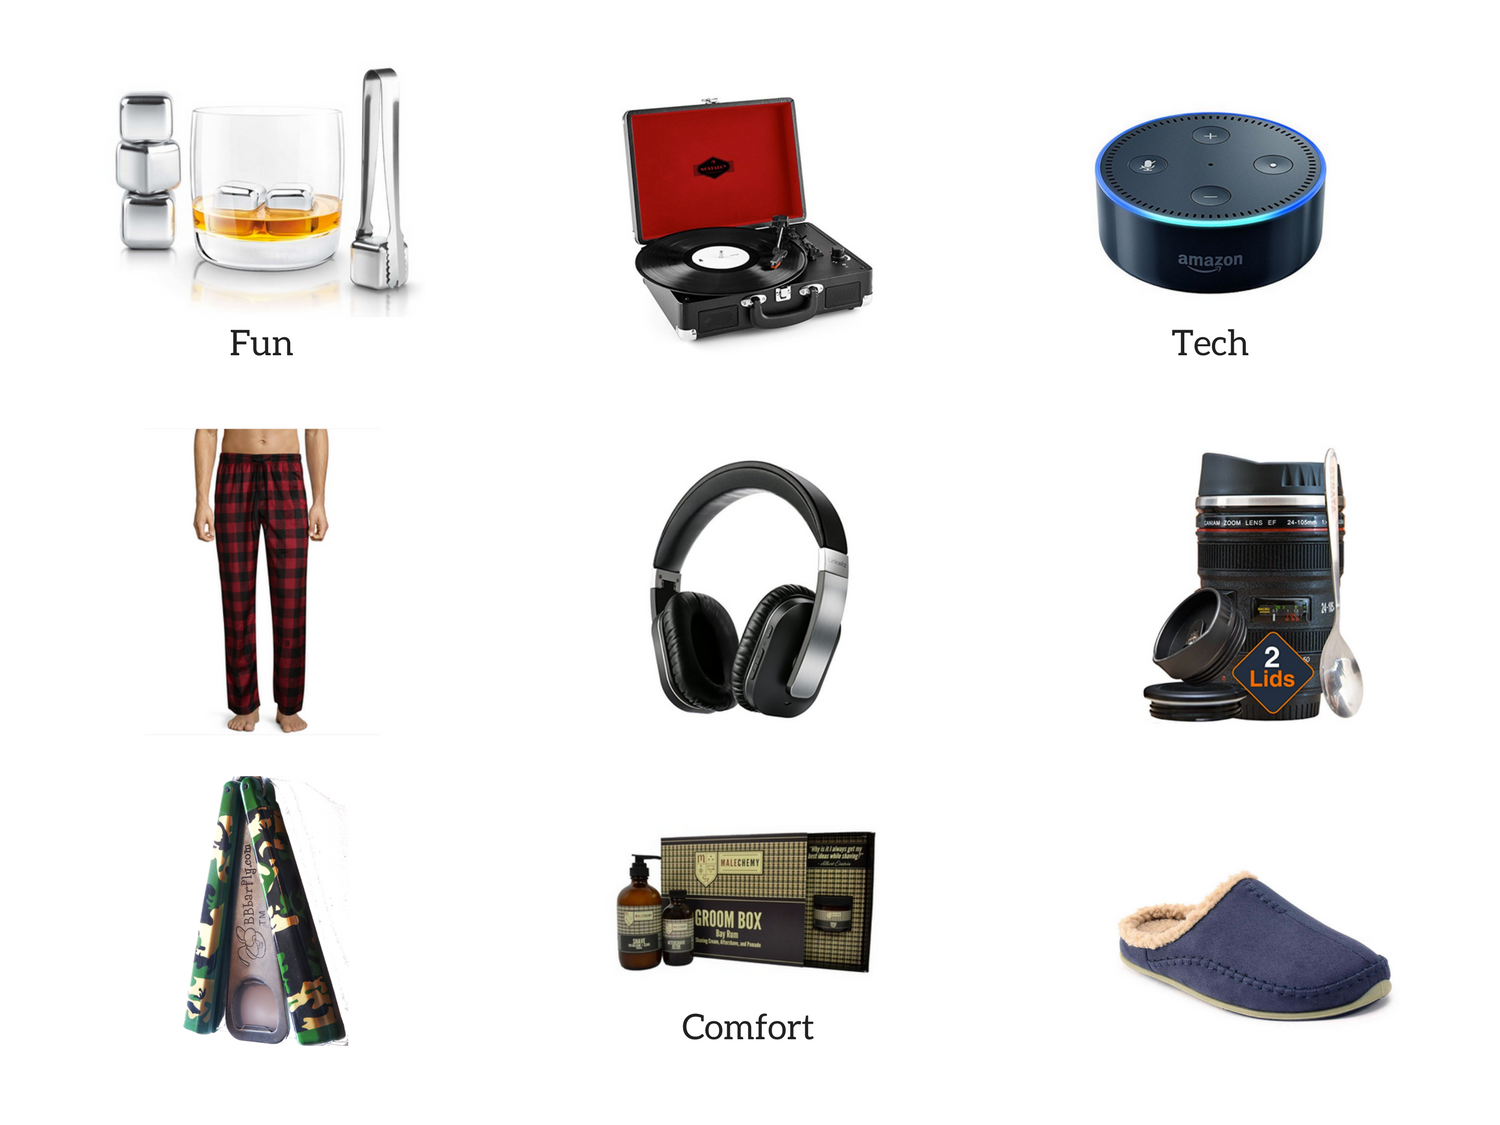 Christmas Gift Guide Perfect For That Awesome Guy!